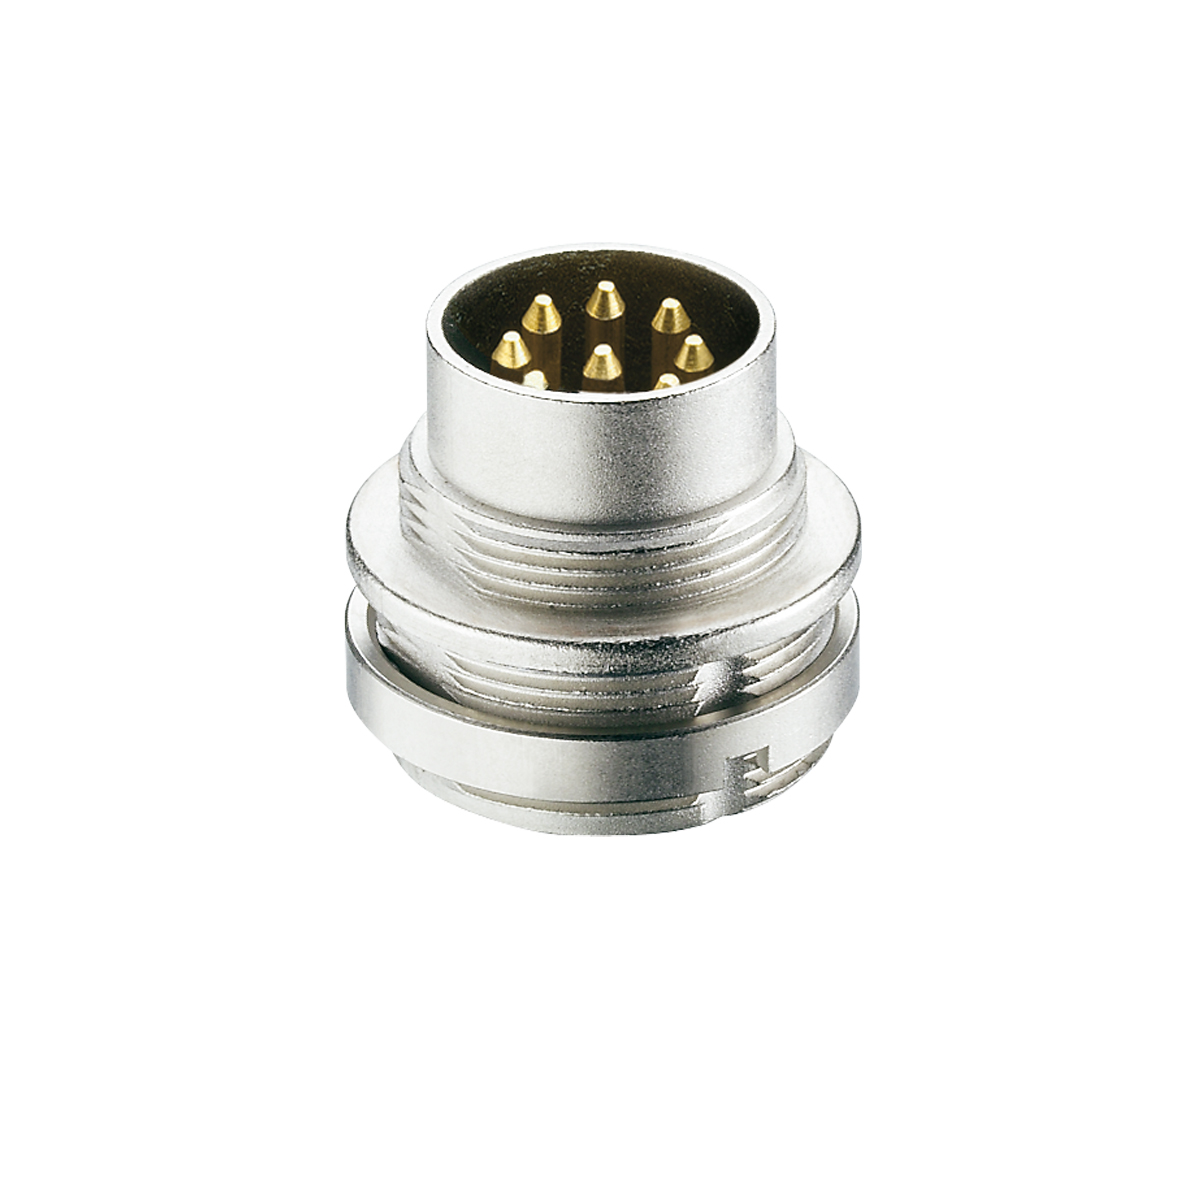 Lumberg: 0314-1 (Series 03 | Circular connectors with threaded joint M16 acc. to IEC 61076-2-106, IP40/IP68)